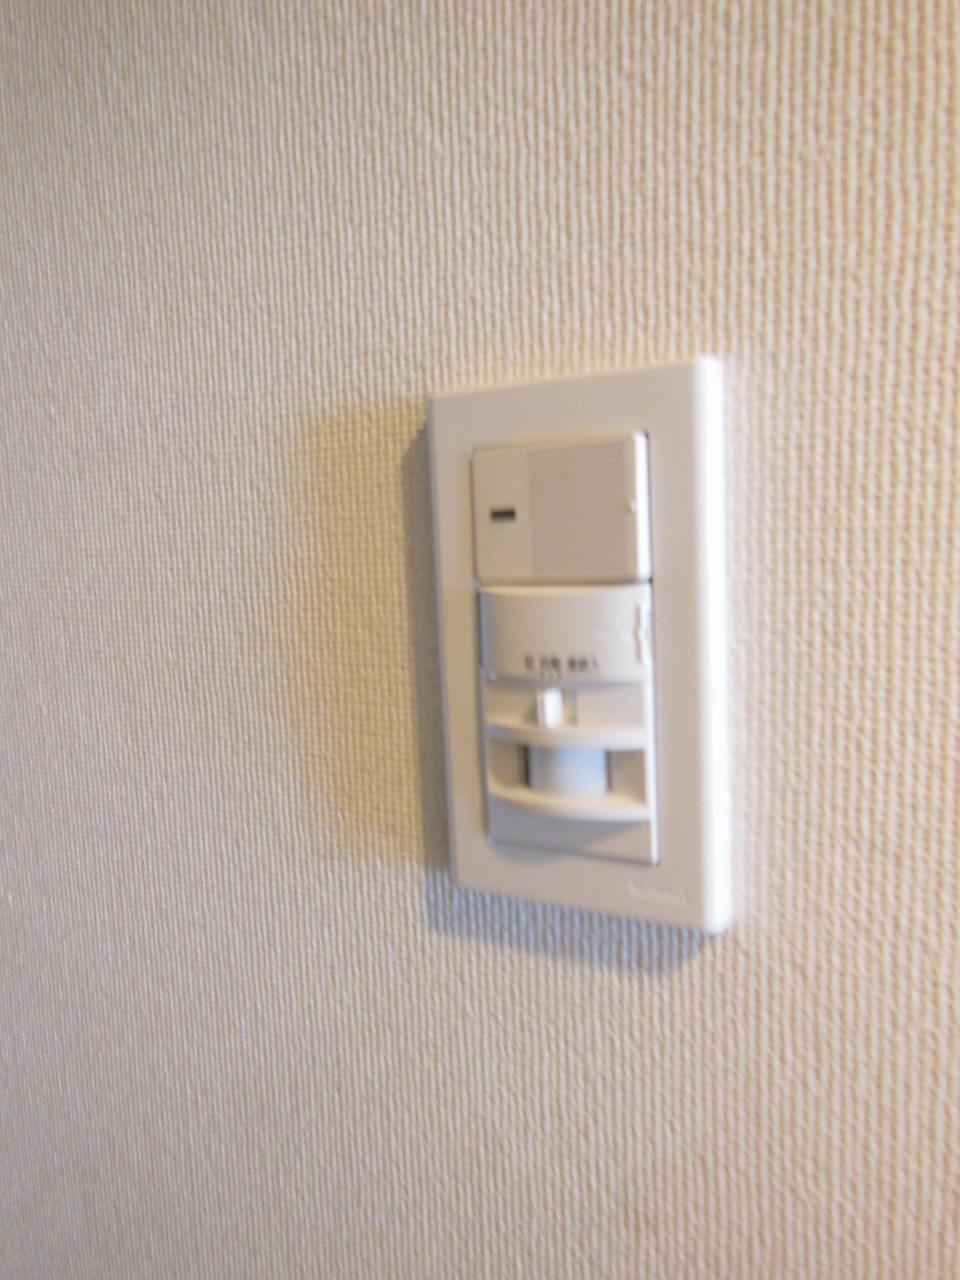 Other introspection. -Sensitive switch provided in the living room entrance